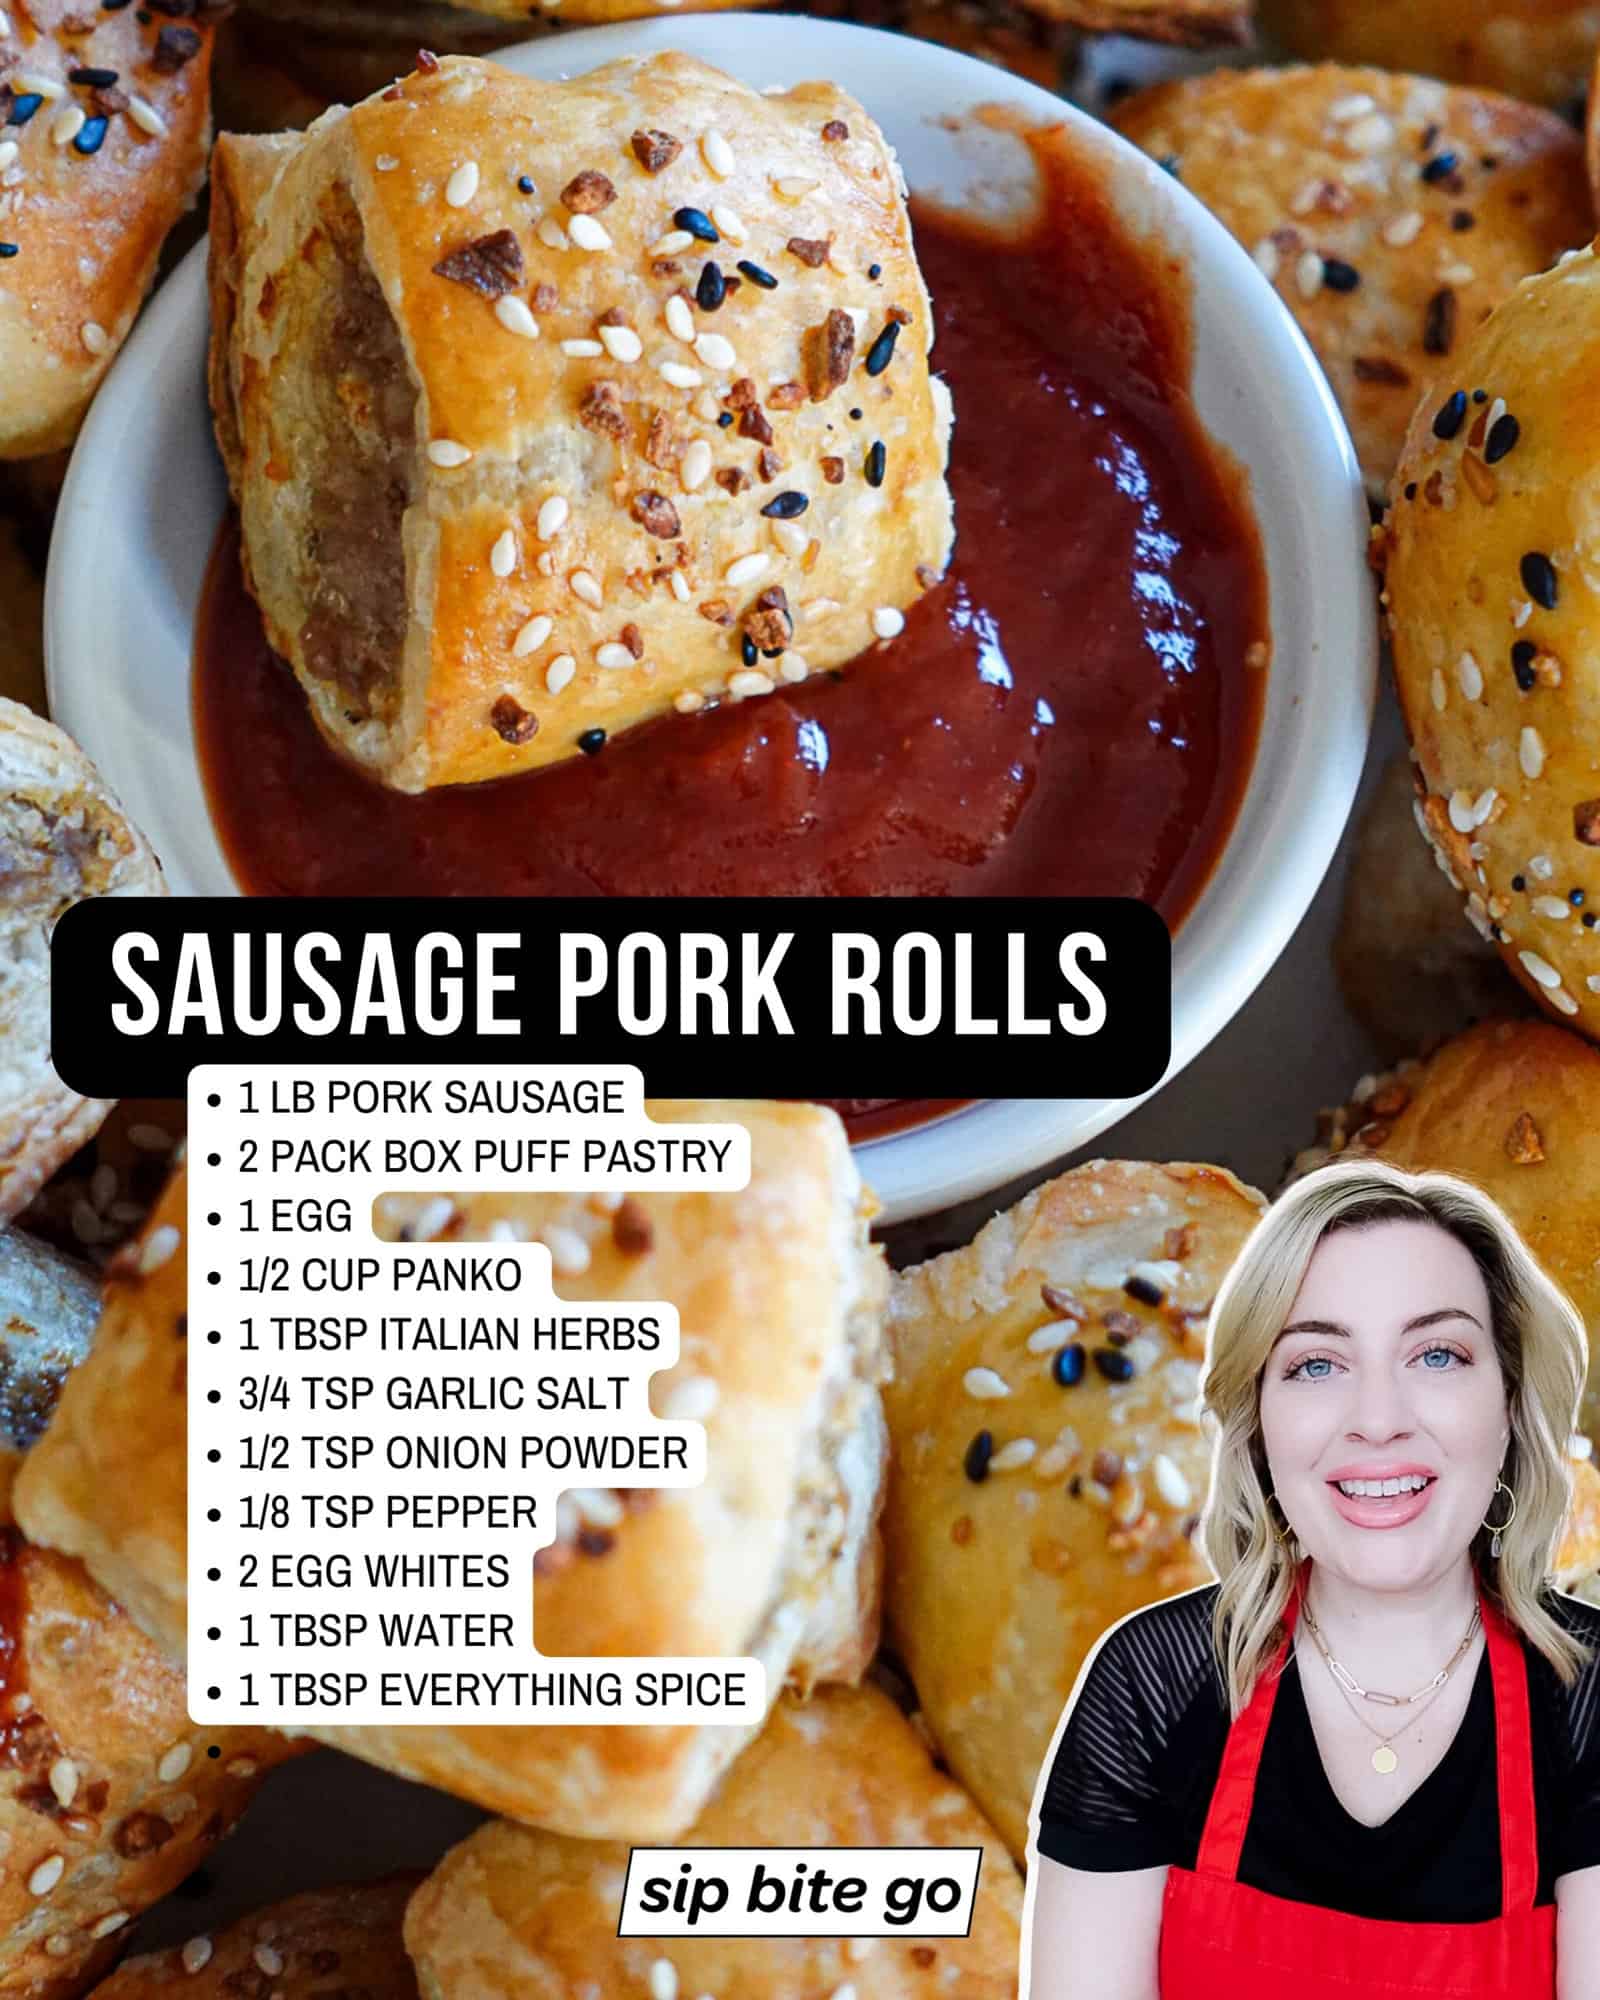 Sausage Pork Rolls with puff pastry recipe ingredients list